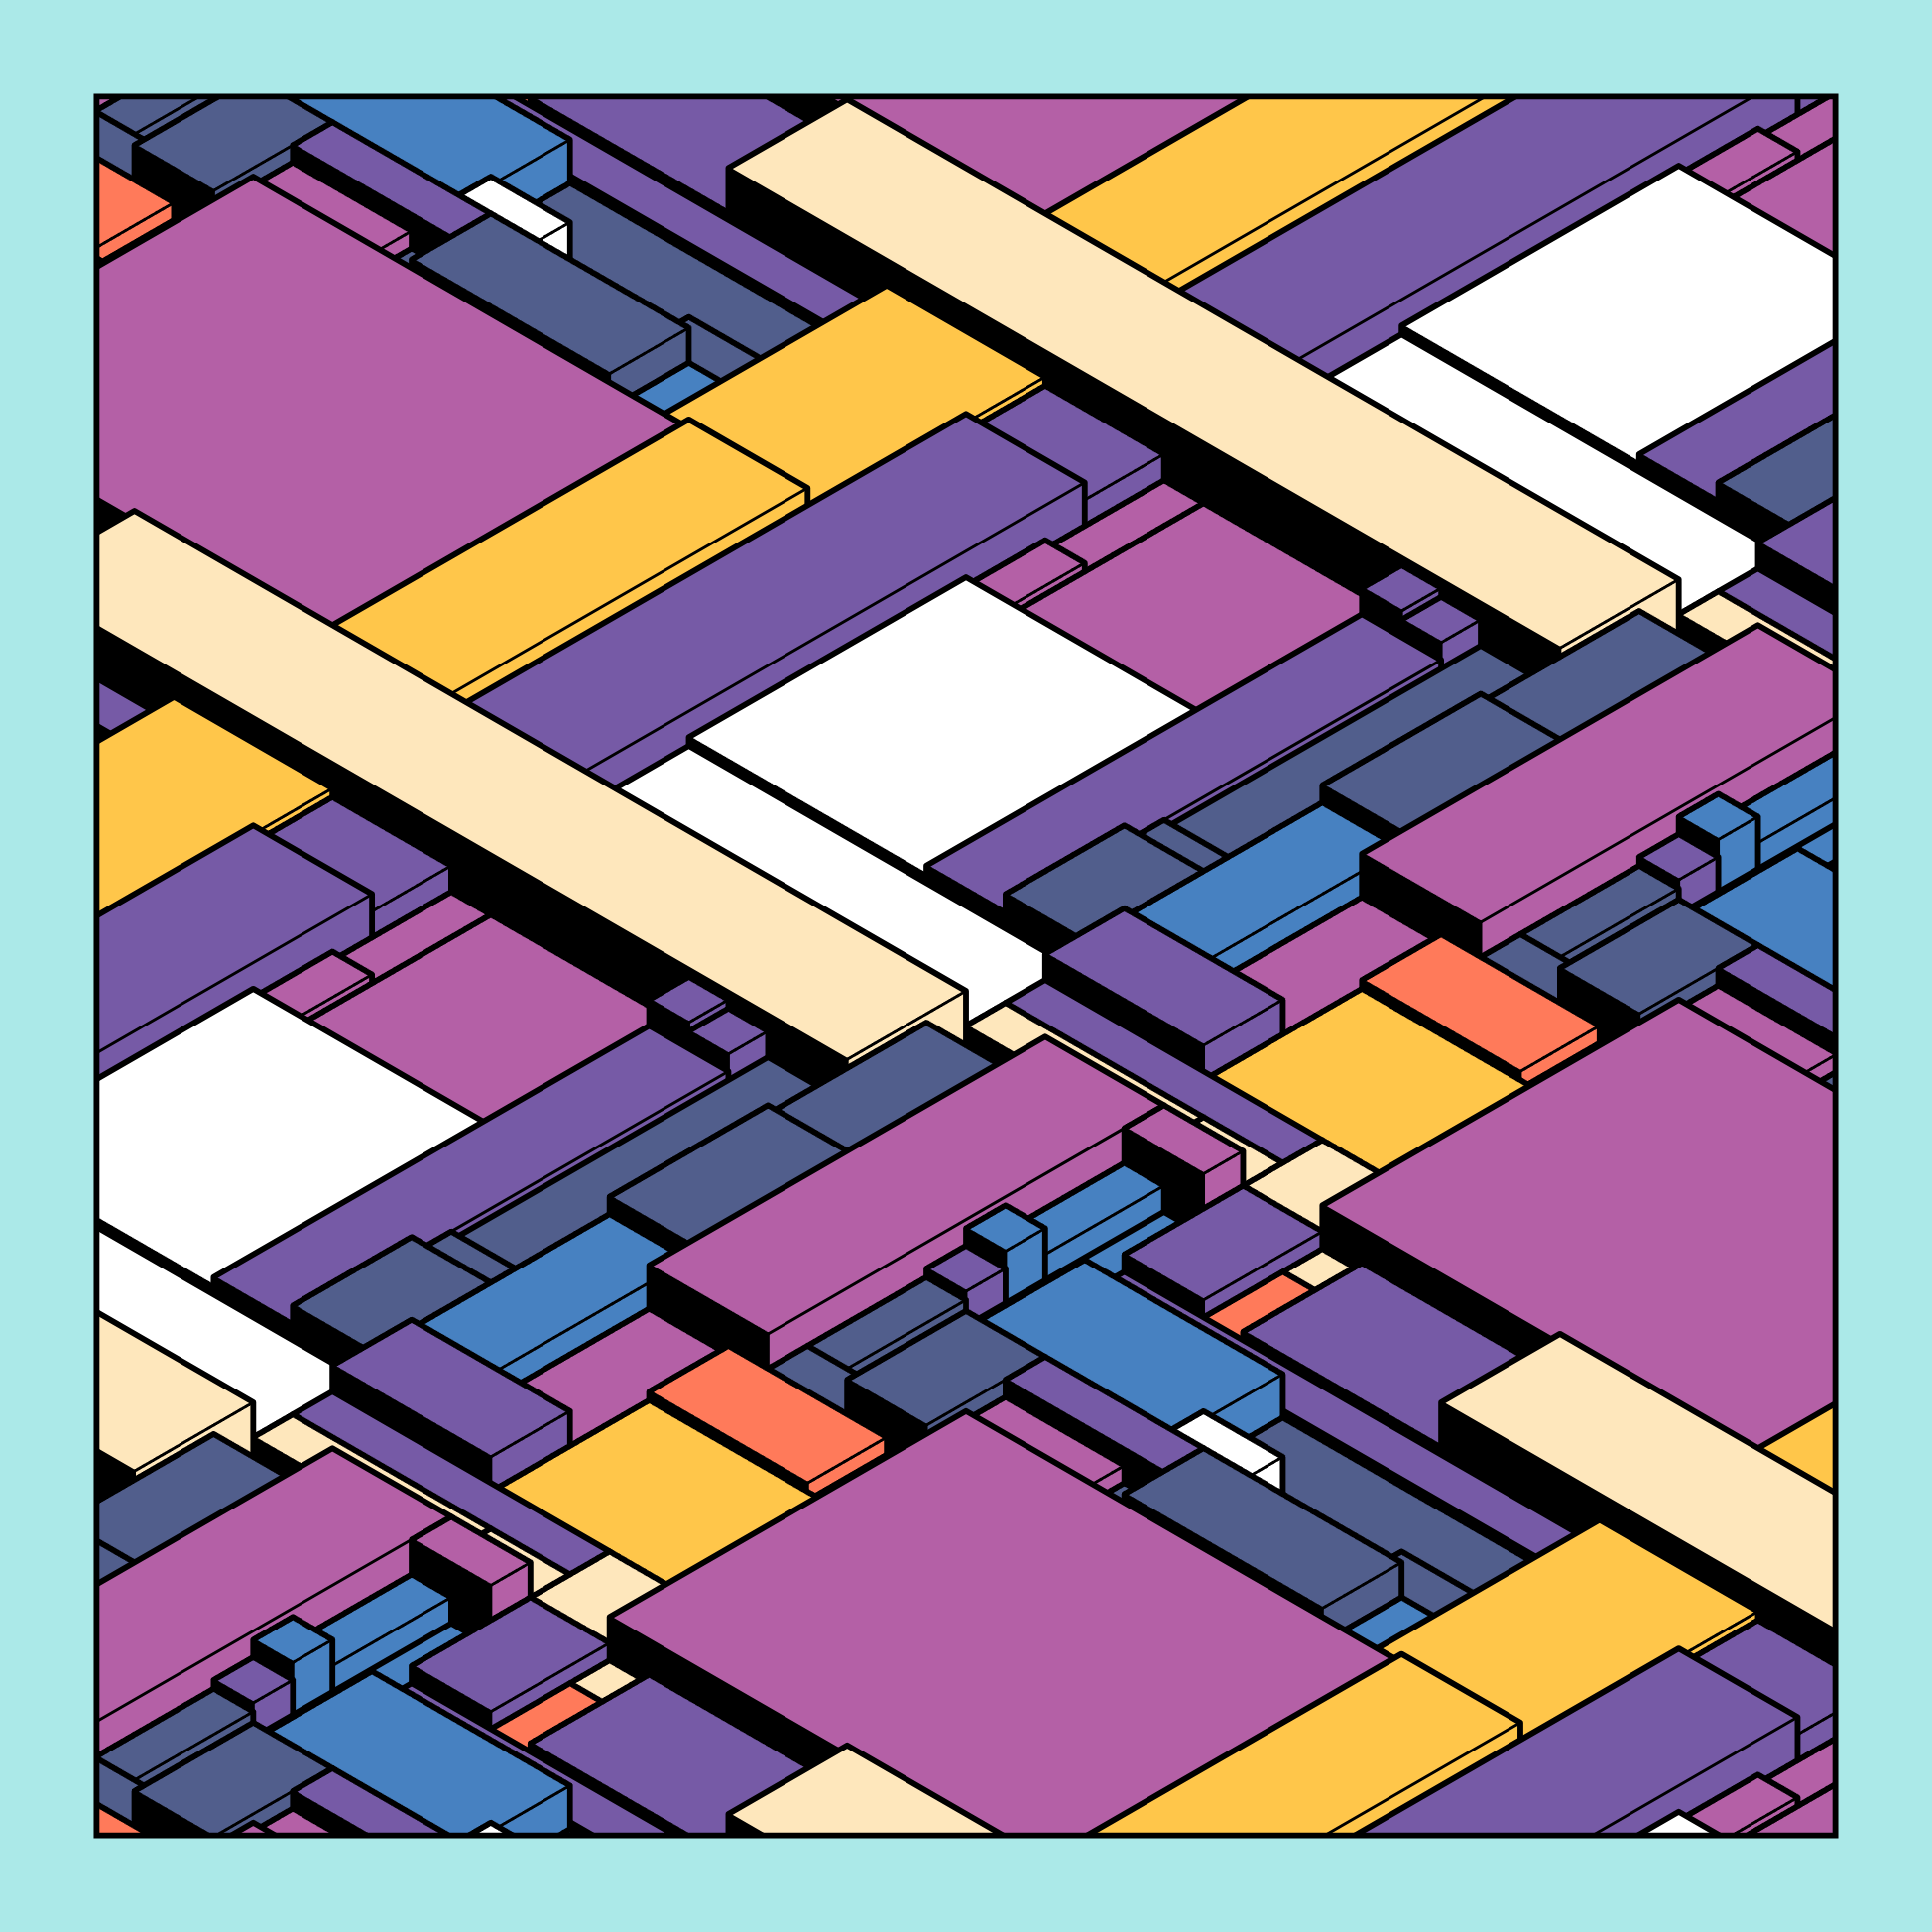 An abstract digital composition of quadrilateral volumes in shades of purple and yellow